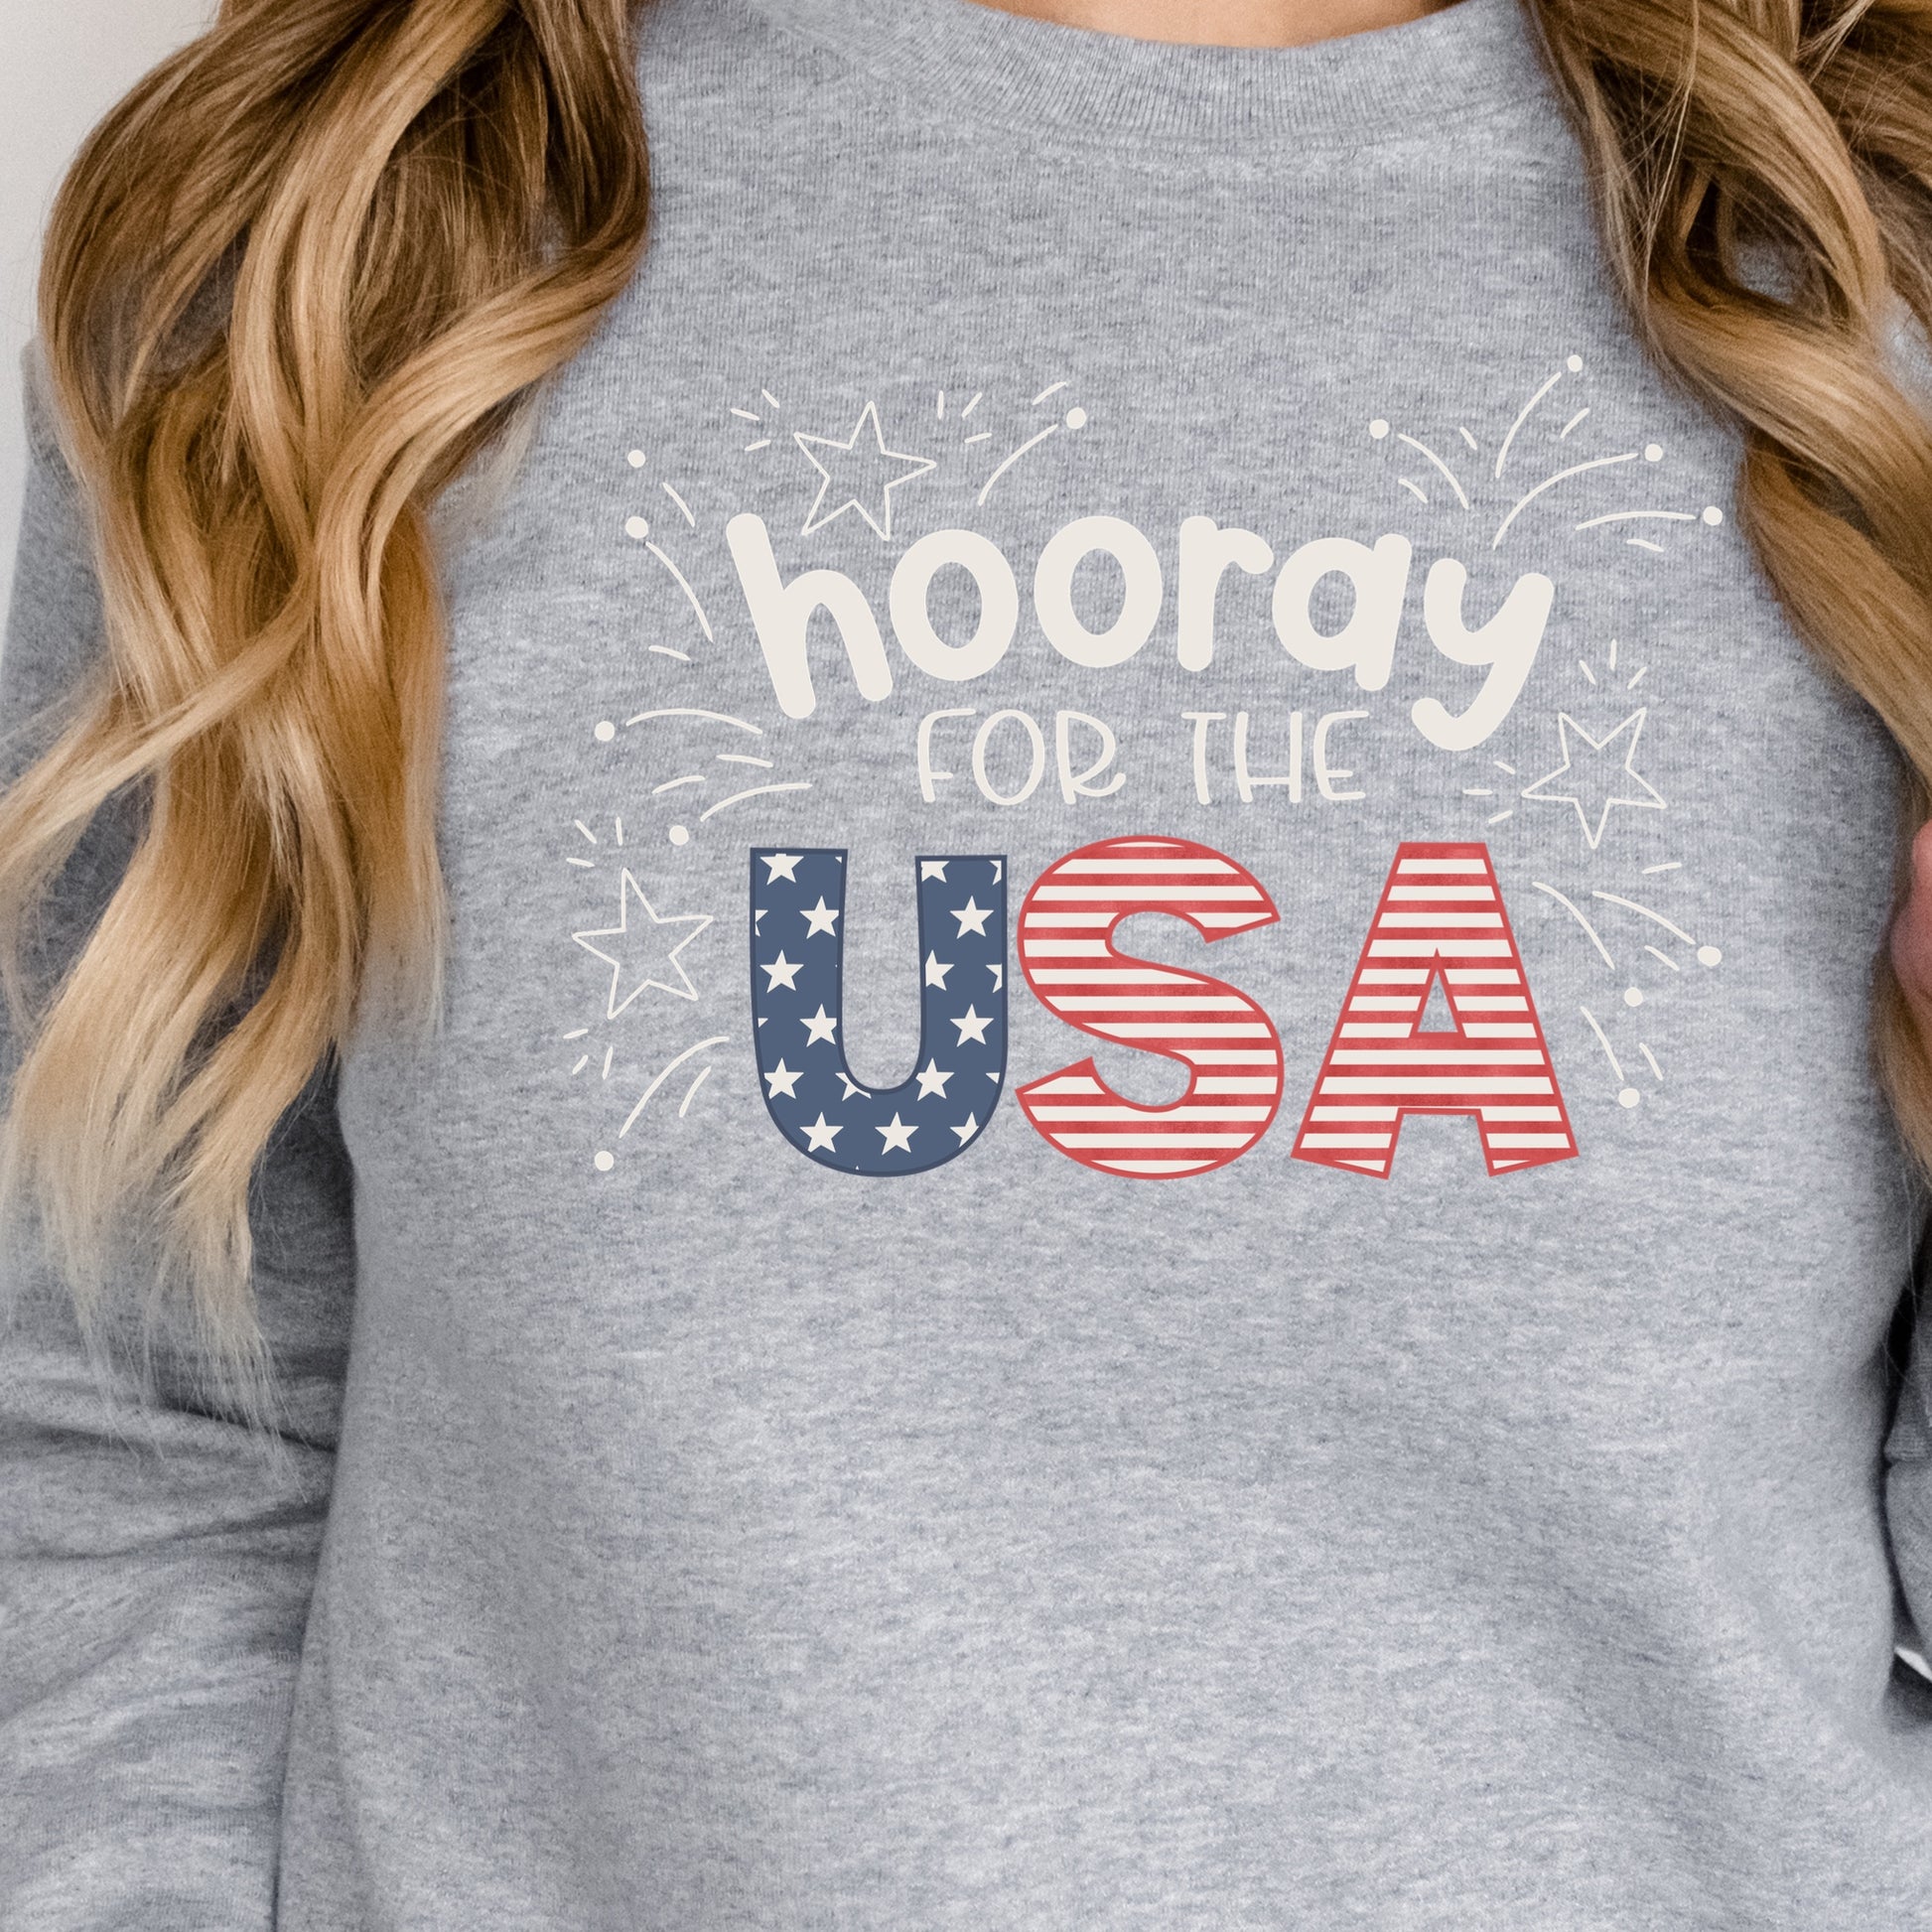 tan hooray word and USA in flag print for july 4th iron on transfer